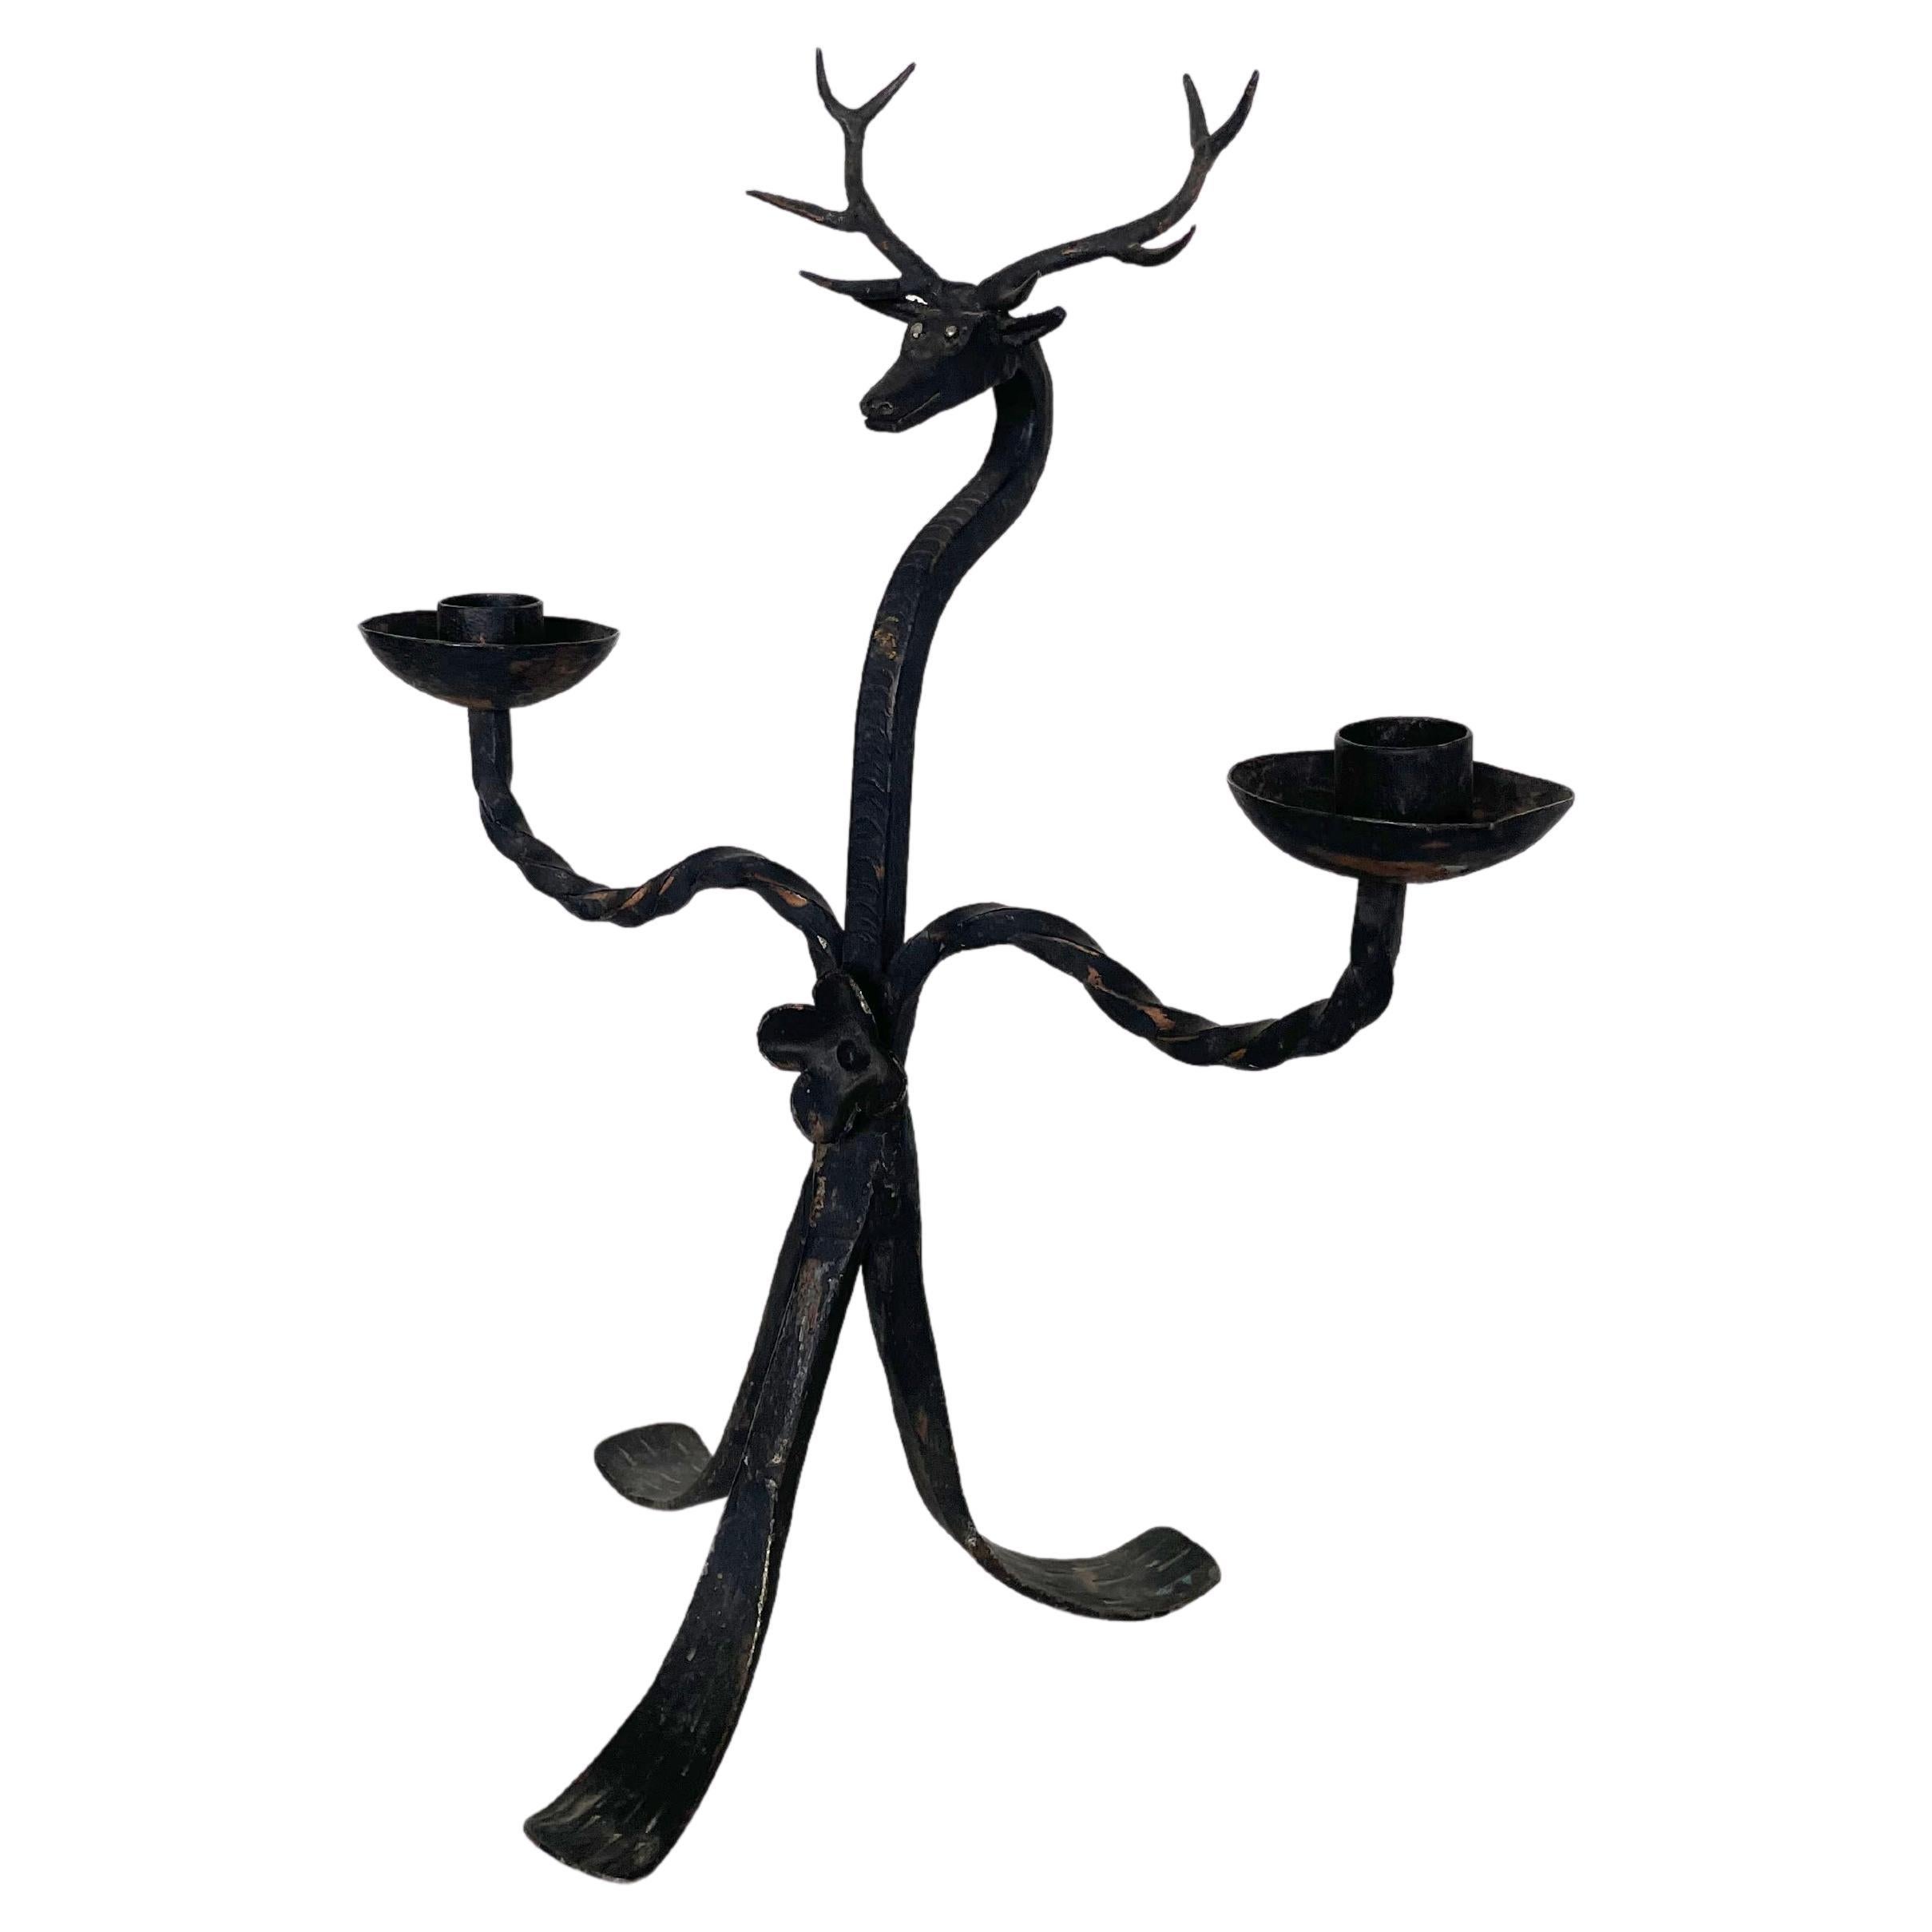 Brutalist Style Wrought Iron Deer Shaped Candlestick Candelabra, 1940s / 1950s For Sale